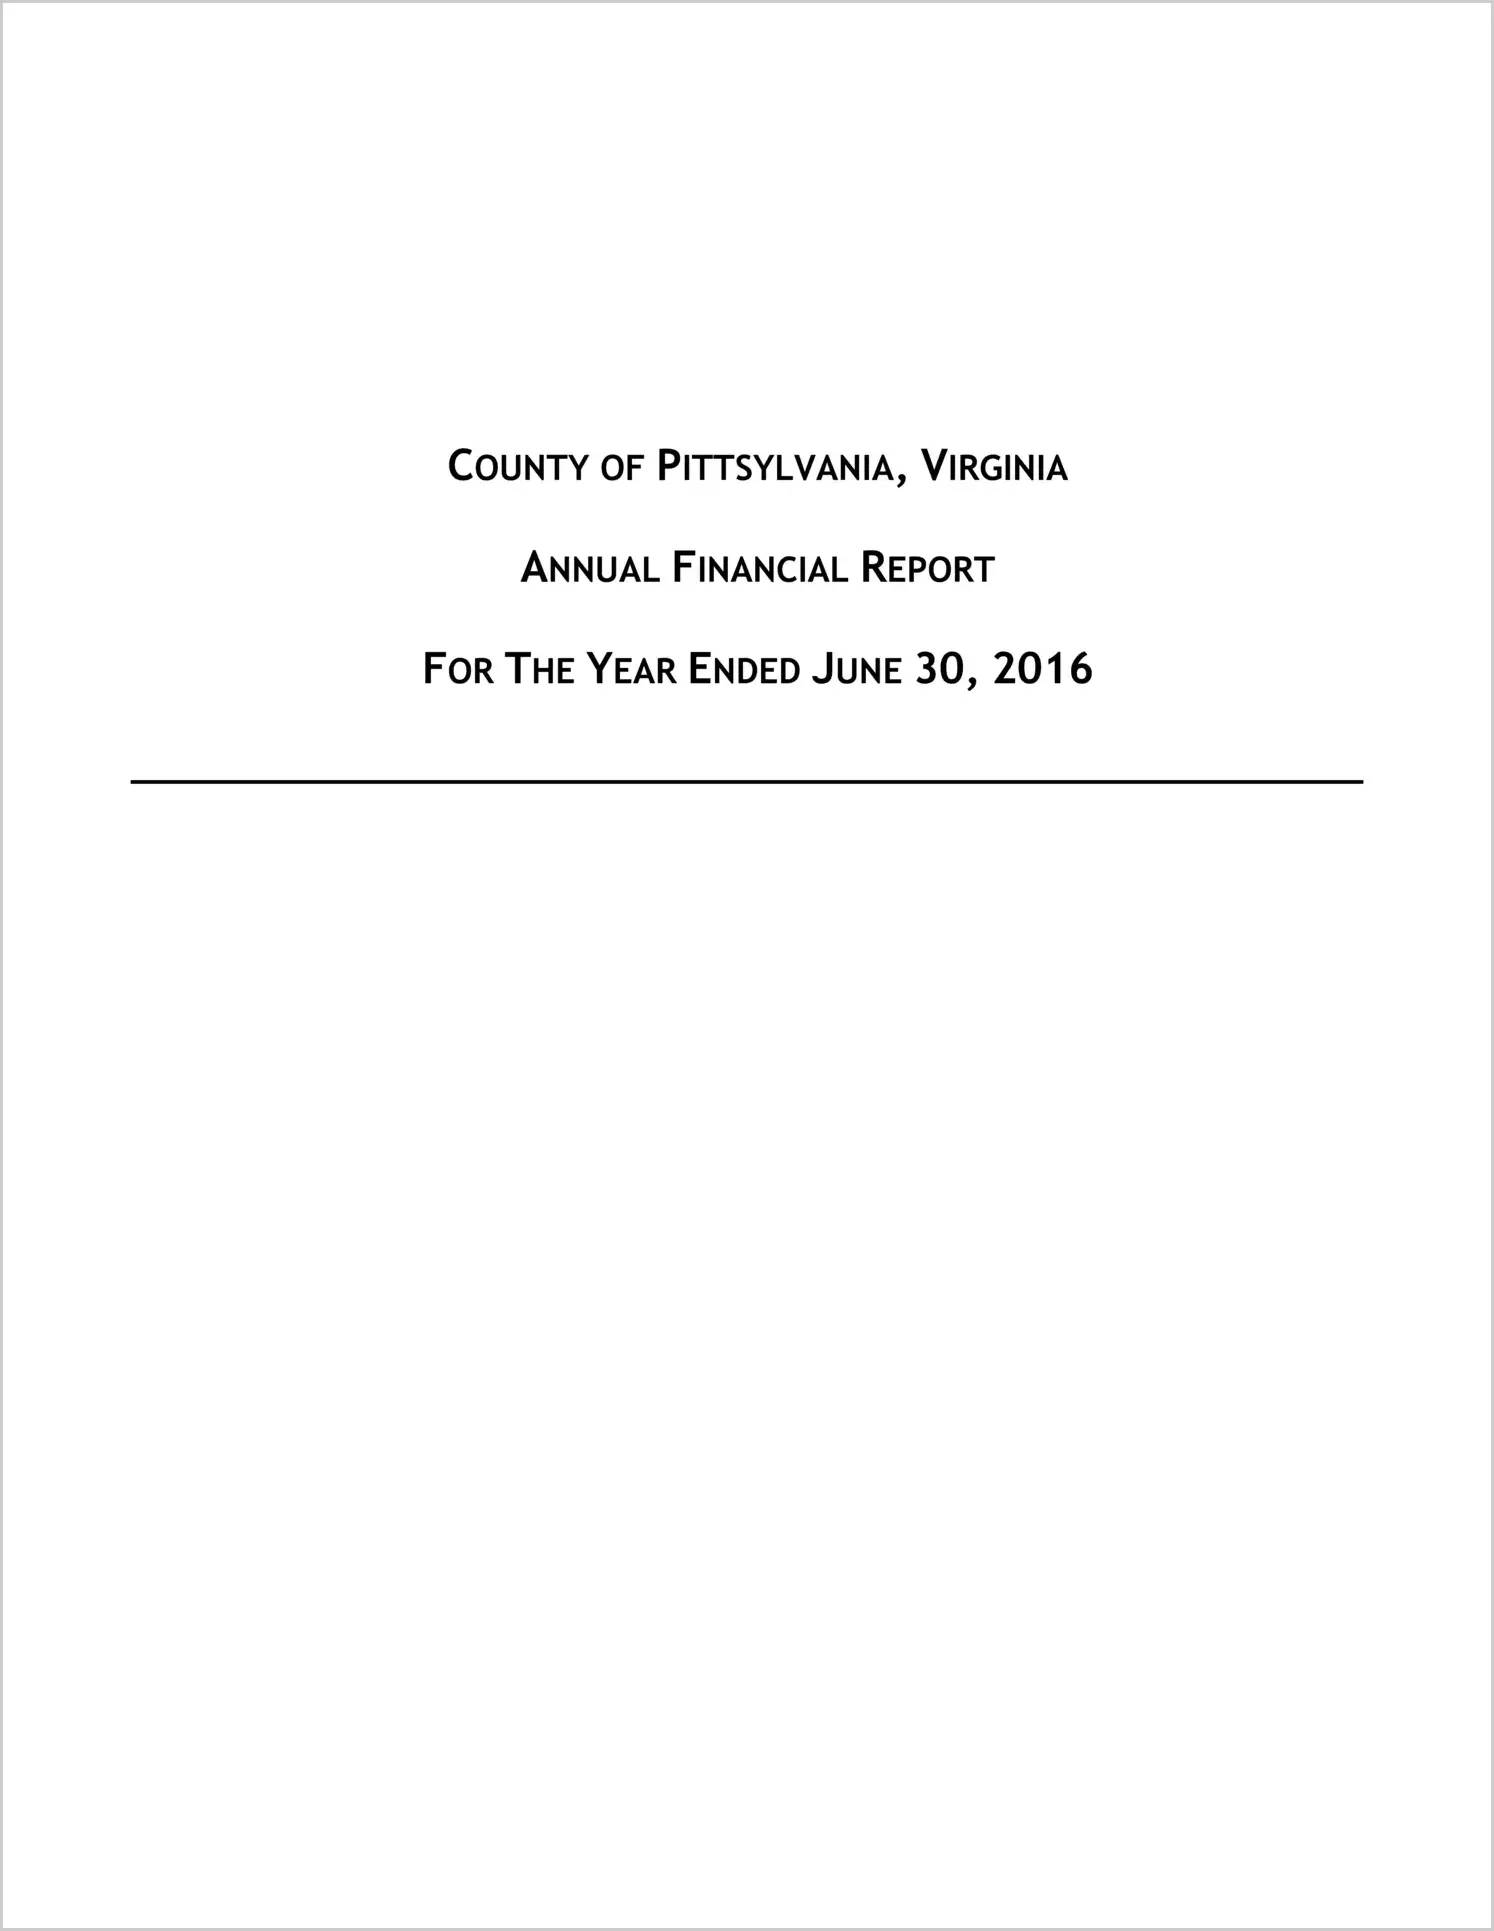 2016 Annual Financial Report for County of Pittsylvania